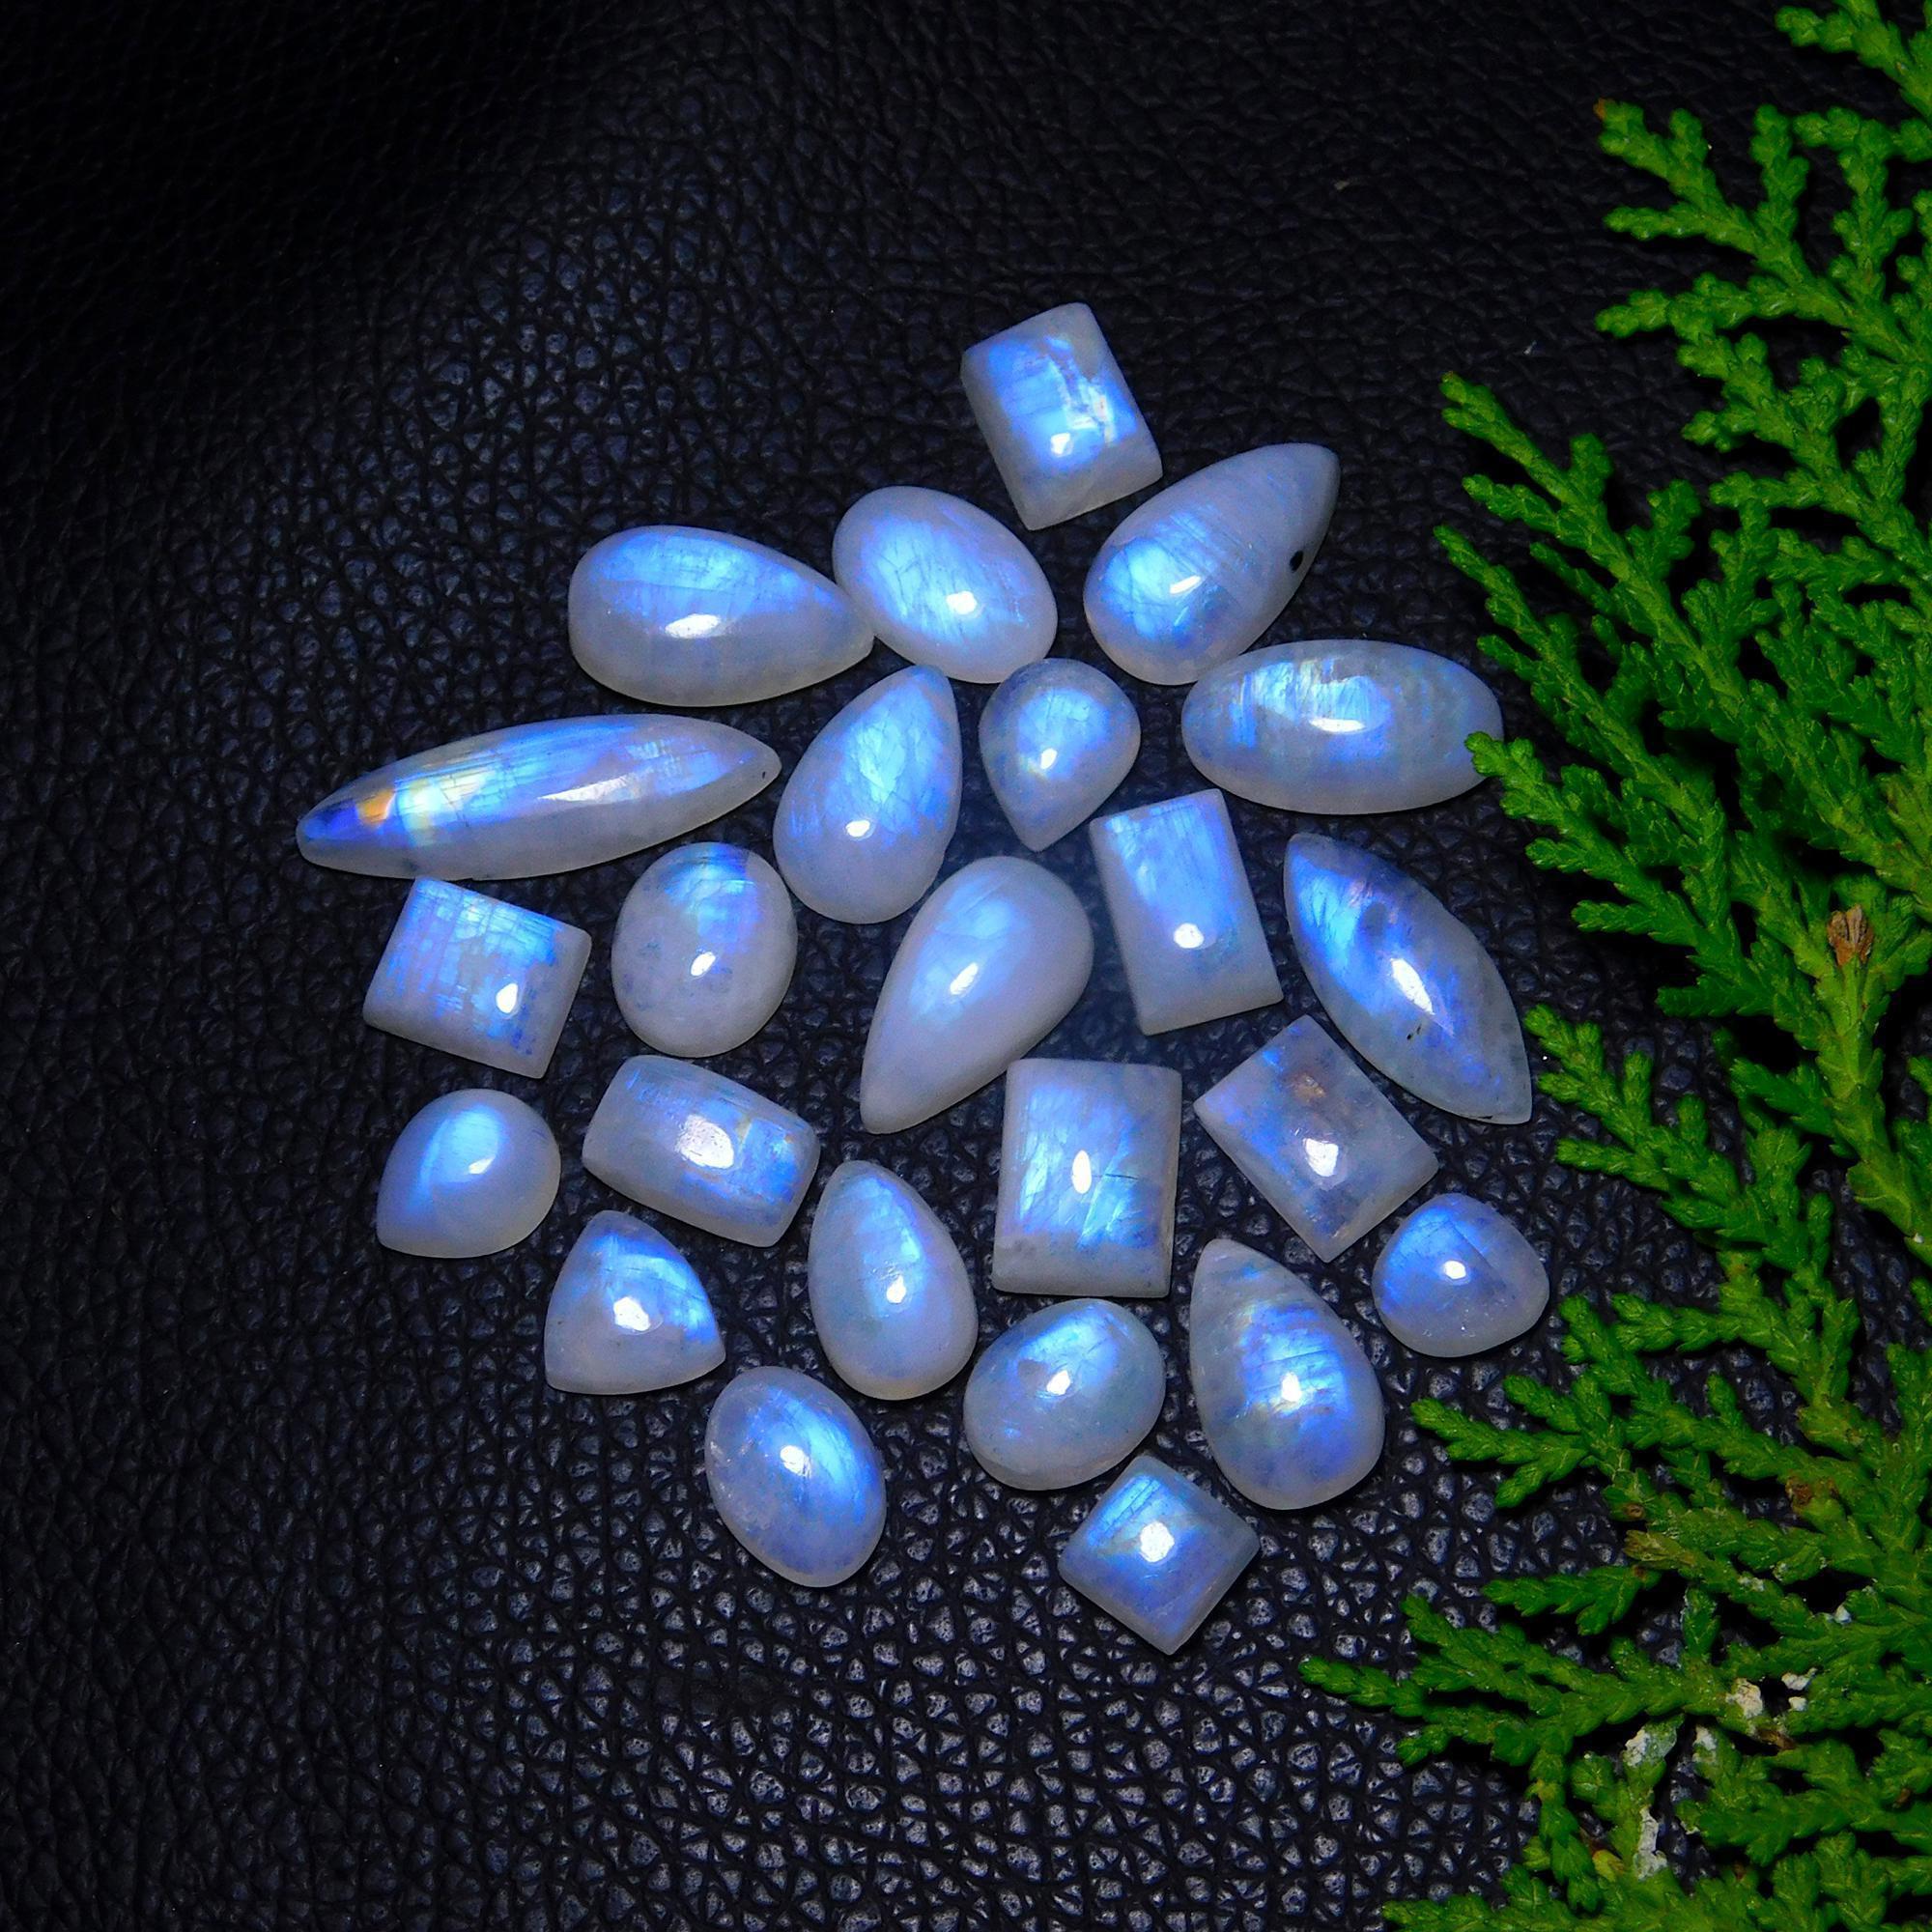 24Pcs 117Cts Natural Rainbow Moonstone Cabochon Blue Fire Loose Gemstone Crystal jewelry supplies wholesale lot gift for her Black Friday 25X7 10X8mm#9391